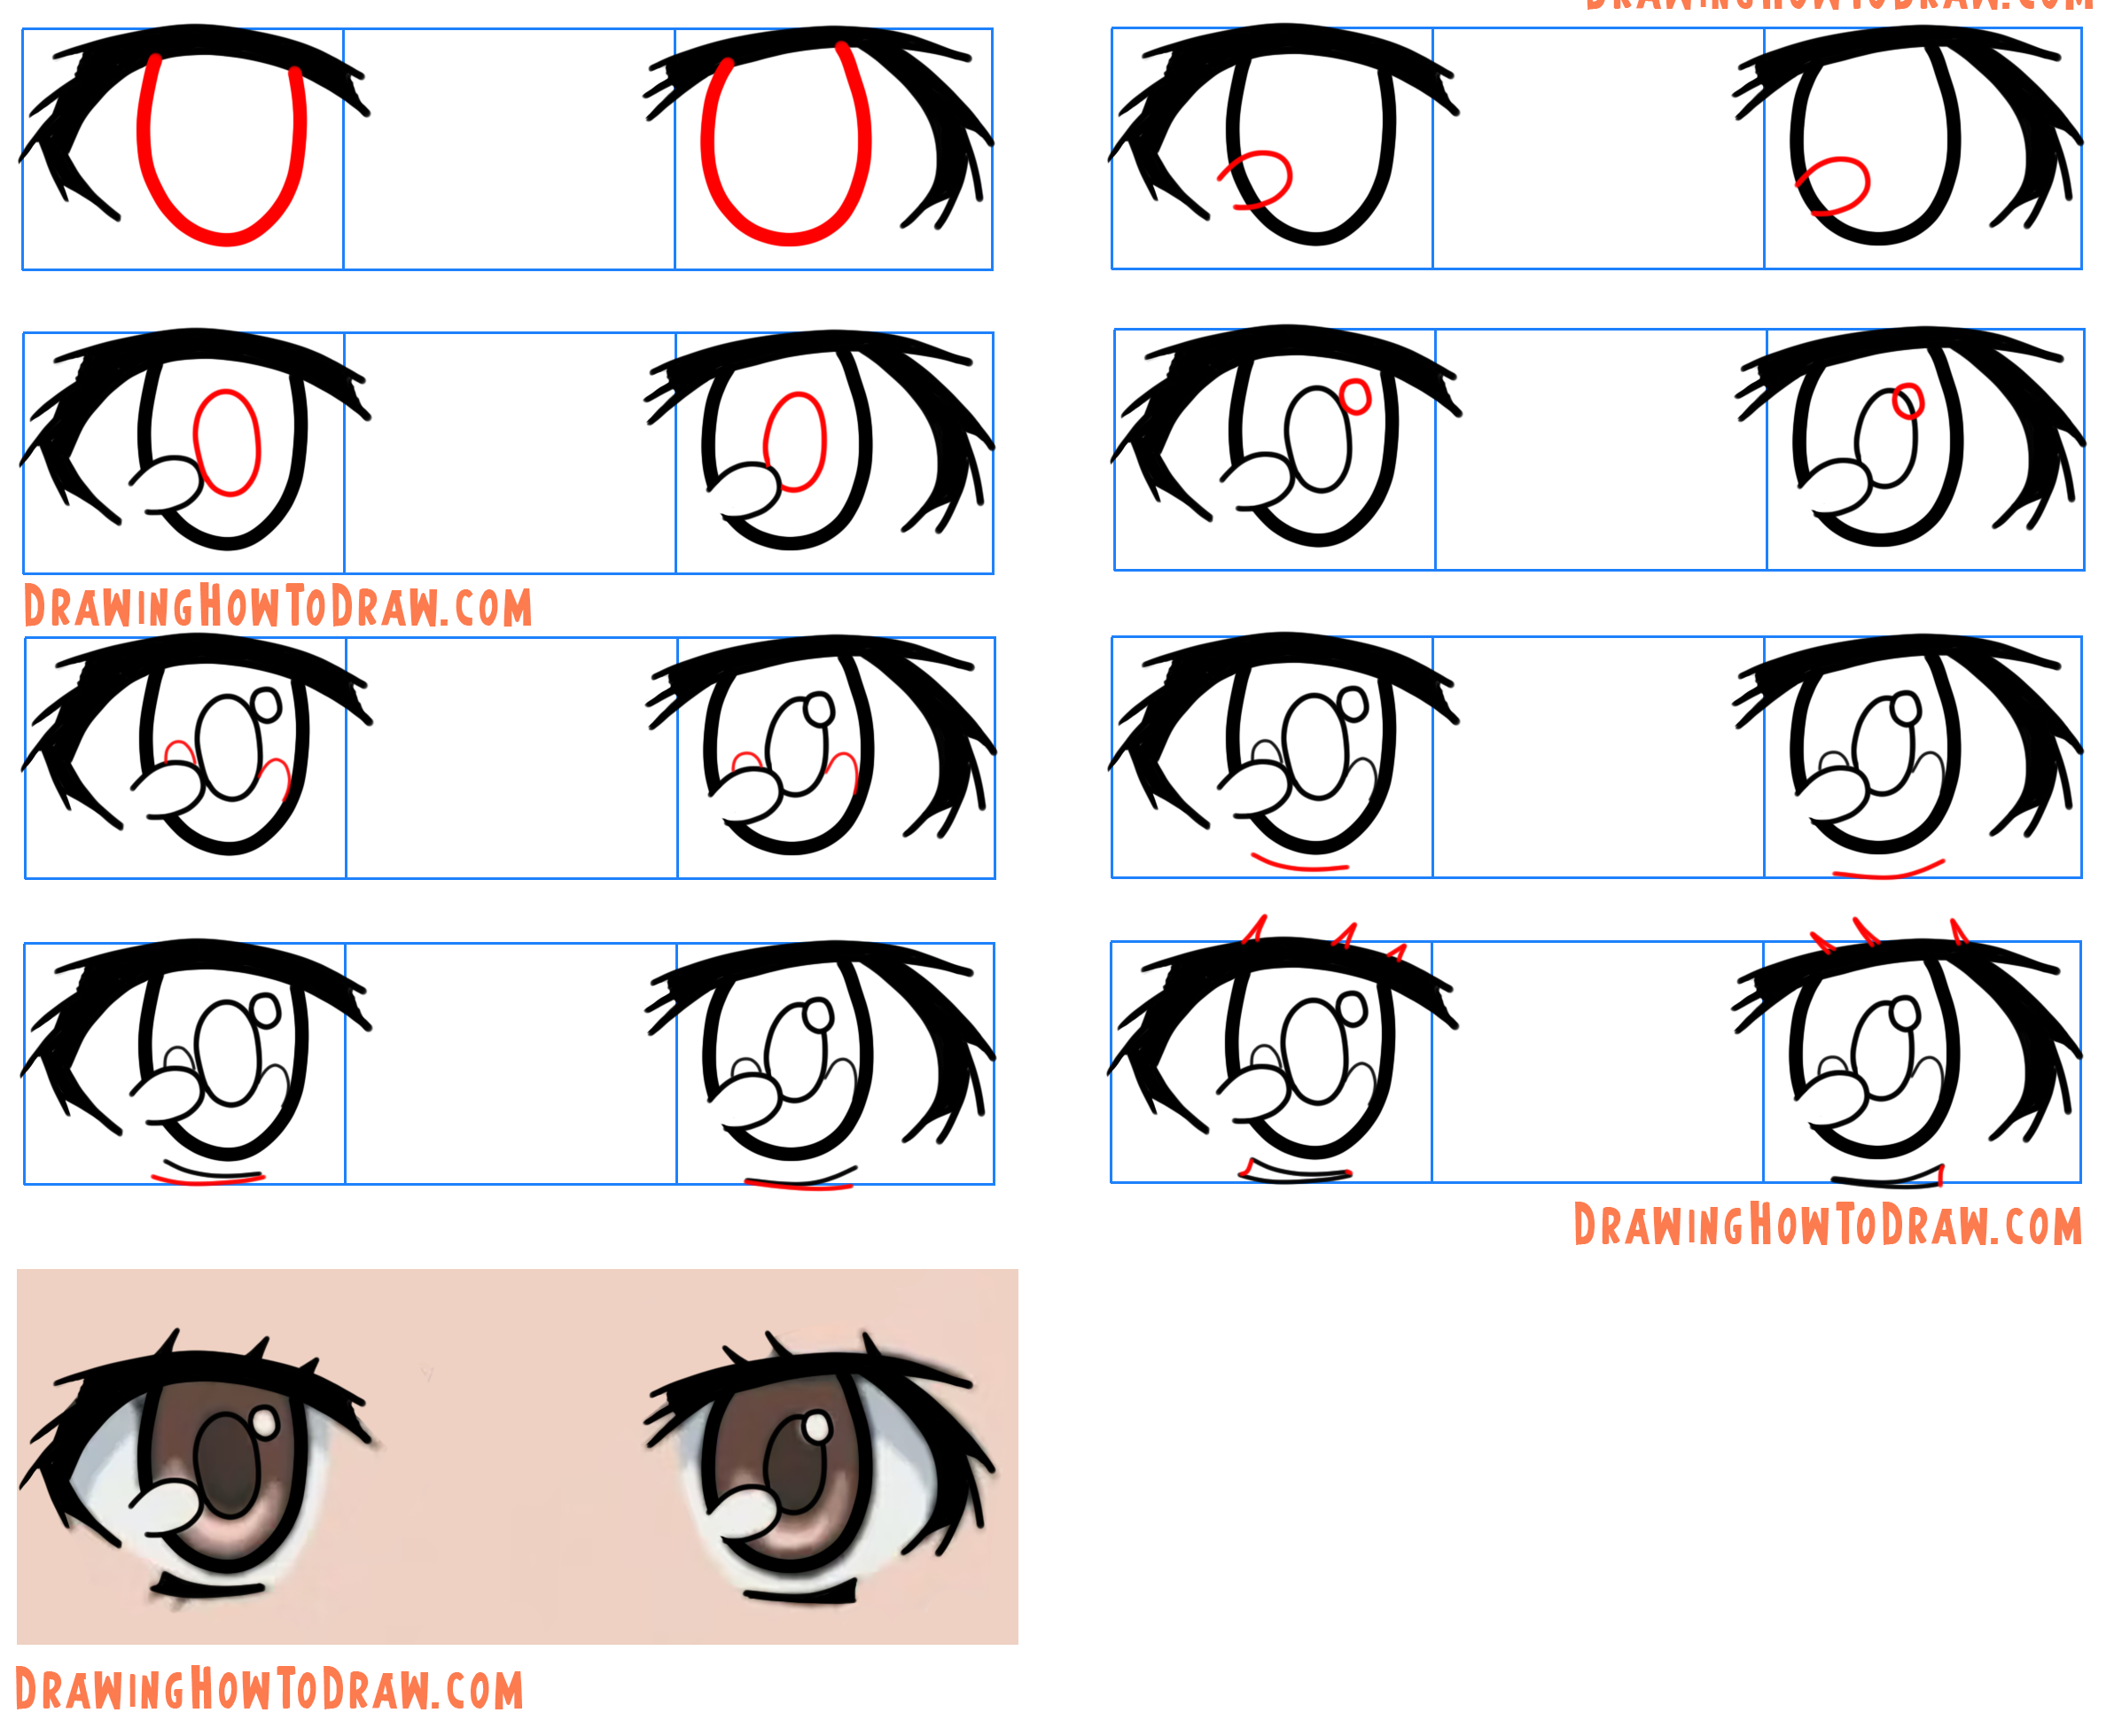 Learn How to Draw Eyes - Anime / Manga - Drawing Anime Eyes Easy Step-by-Step Drawing Tutorial